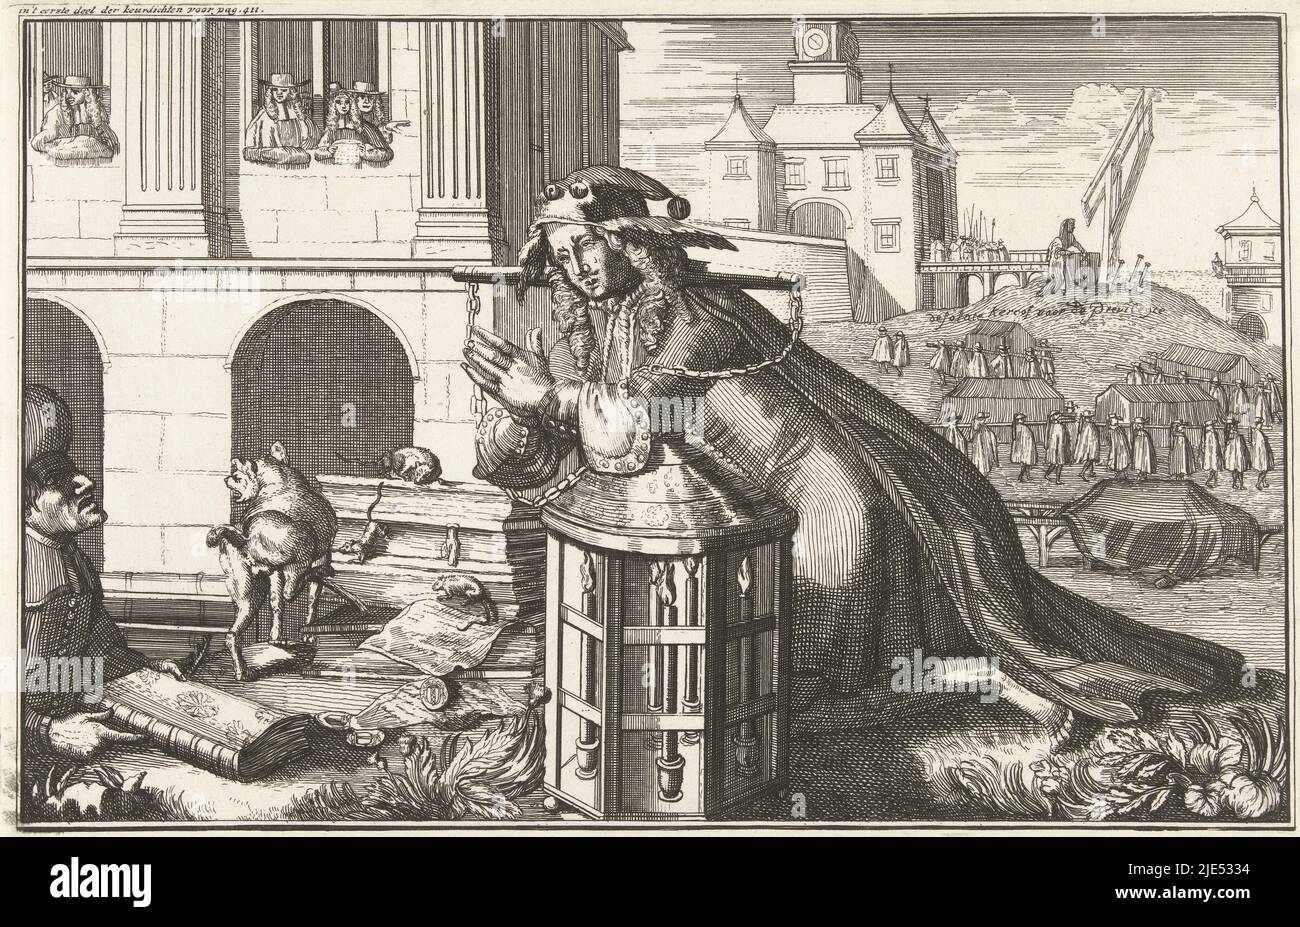 Groothans and the Privilege finder. Cartoon on the regents of Amsterdam, 1690. The Privilege seeker (the bourgeoisie of Amsterdam) kneels begging and crying with a yoke on his shoulders near a large lanto (with which he seeks privileges), on the left a regent hands him a book. On the left a pile of privileges (of Amsterdam) that rats gnaw at and against which a dog pees. In the background on the right a funeral procession in the cemetery indicated as: desolate cercof for Previlegia. Marked top left: in 't eerste deel der keurdichten voor pag. 411., Groothans en de Privilege-zoeker, 1690 Stock Photo